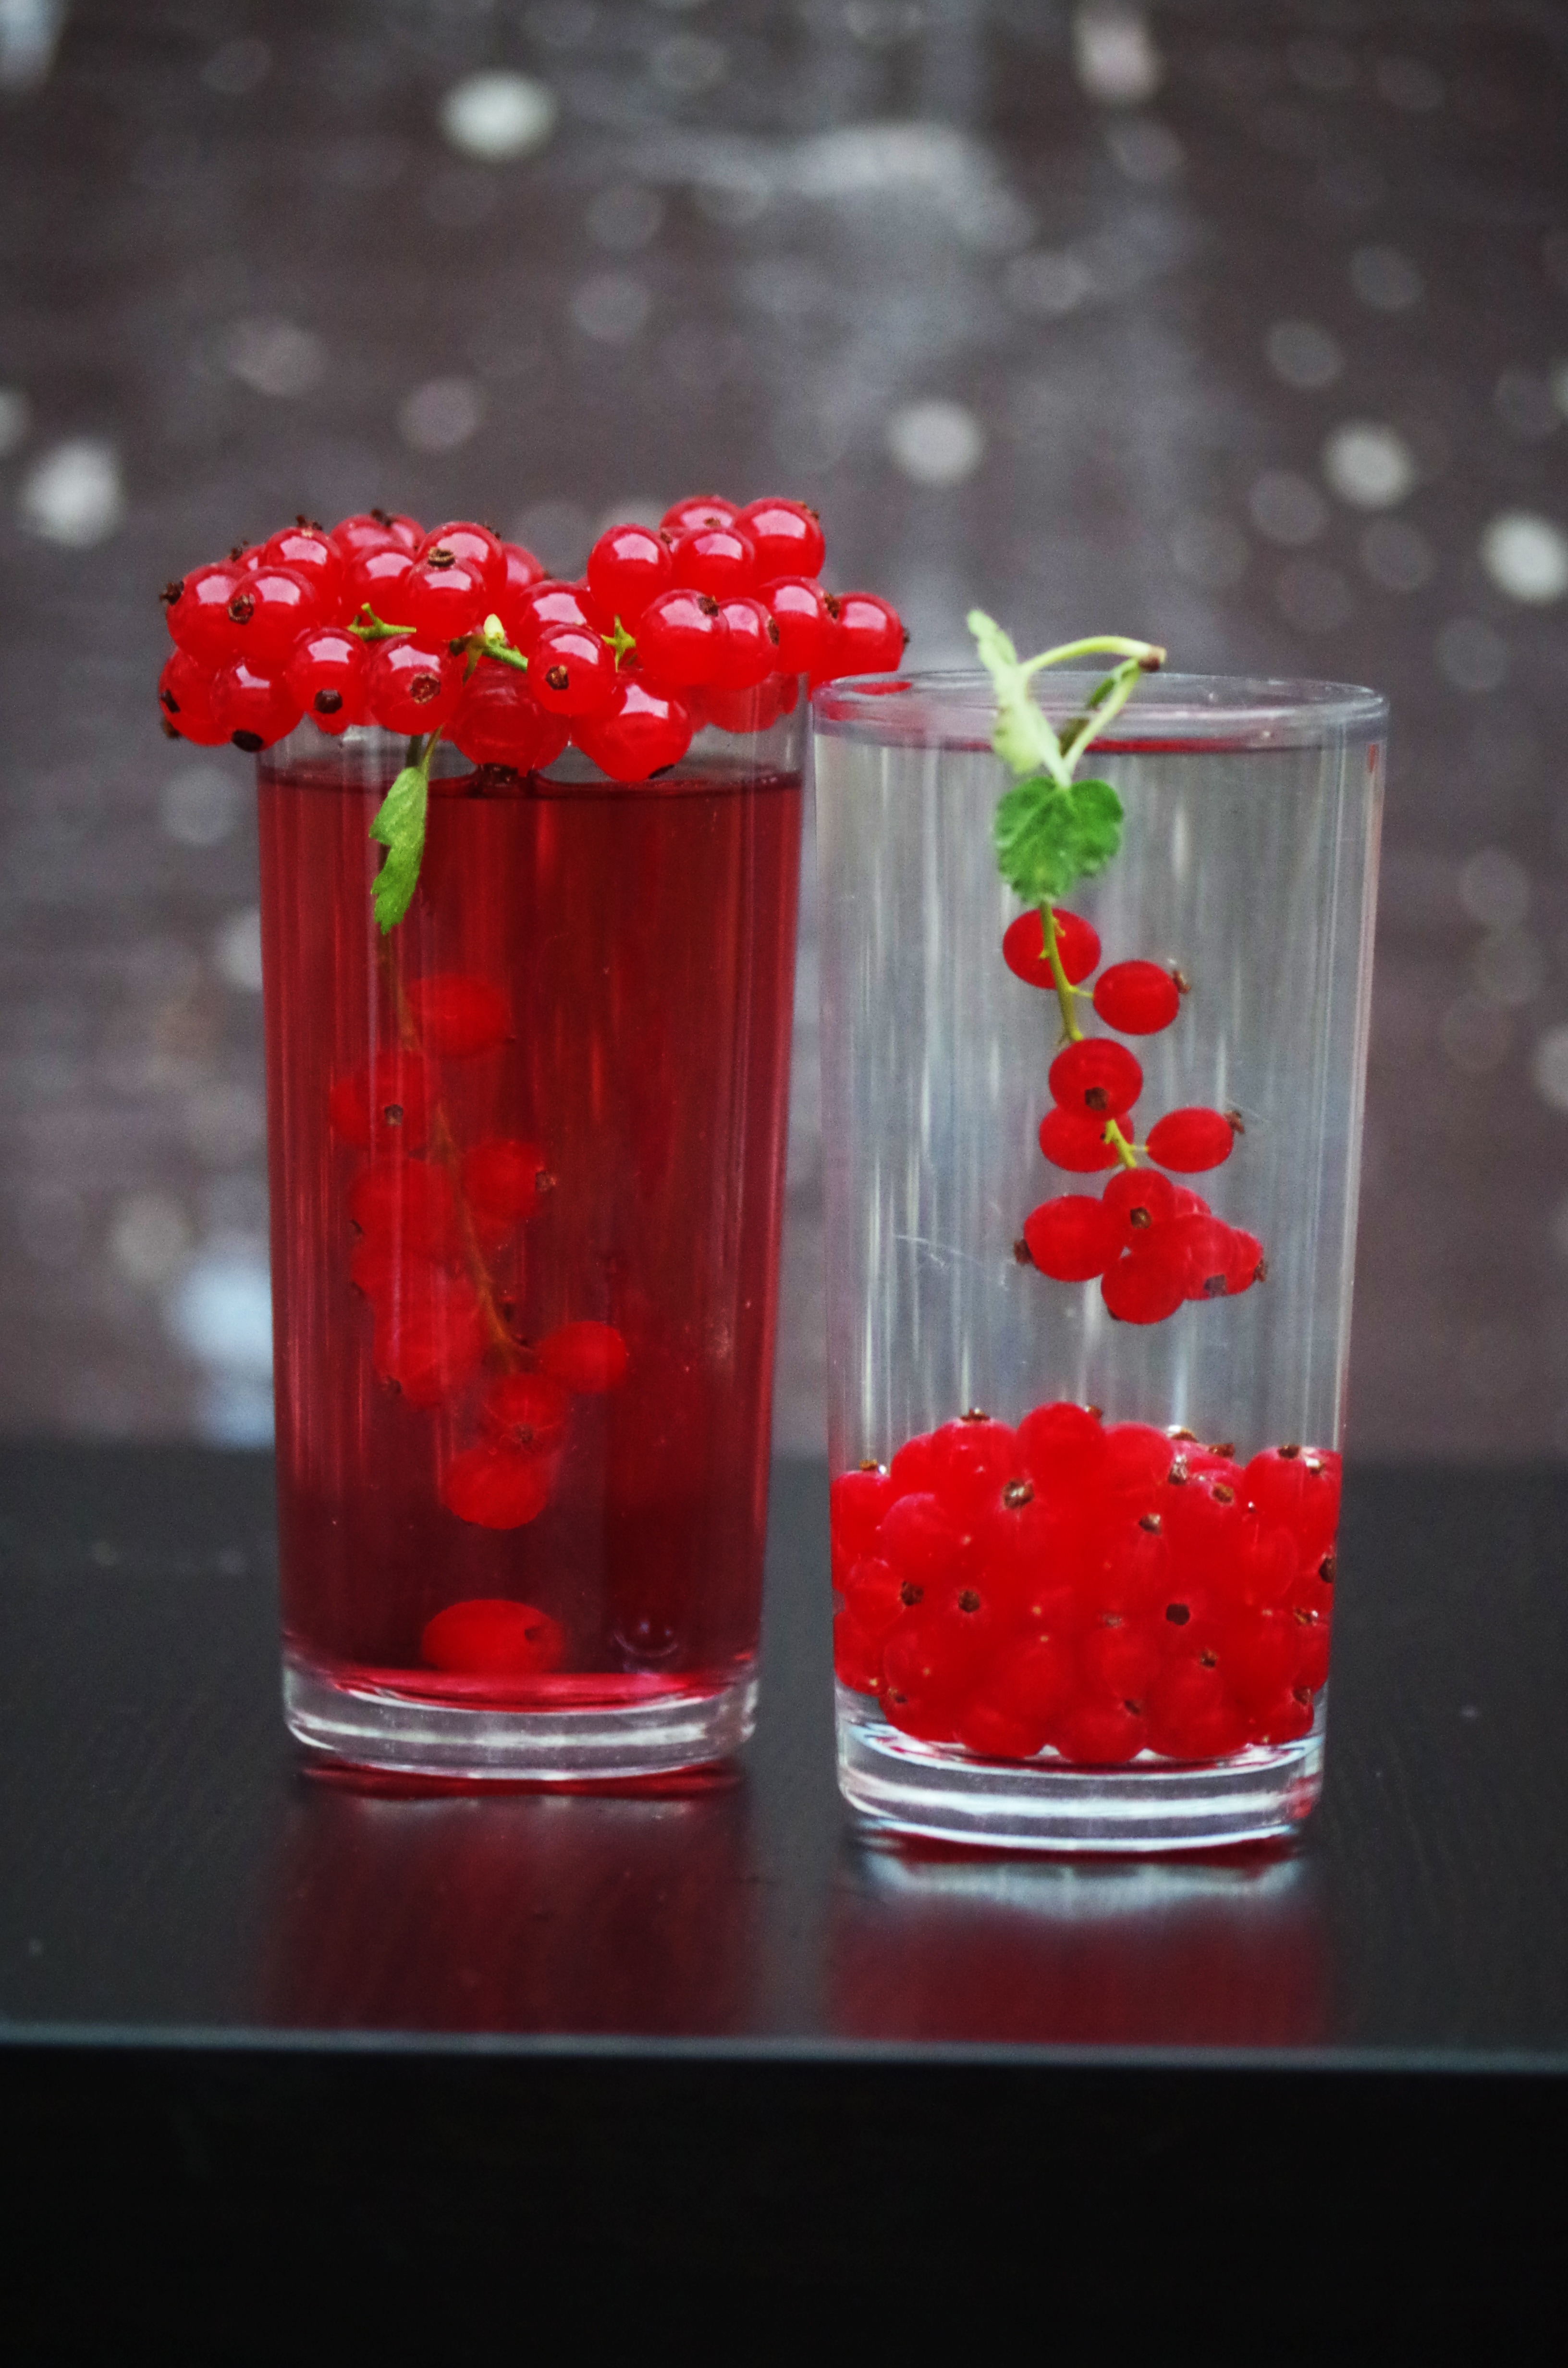 red round fruits in side clear drinking glass with liquids inside